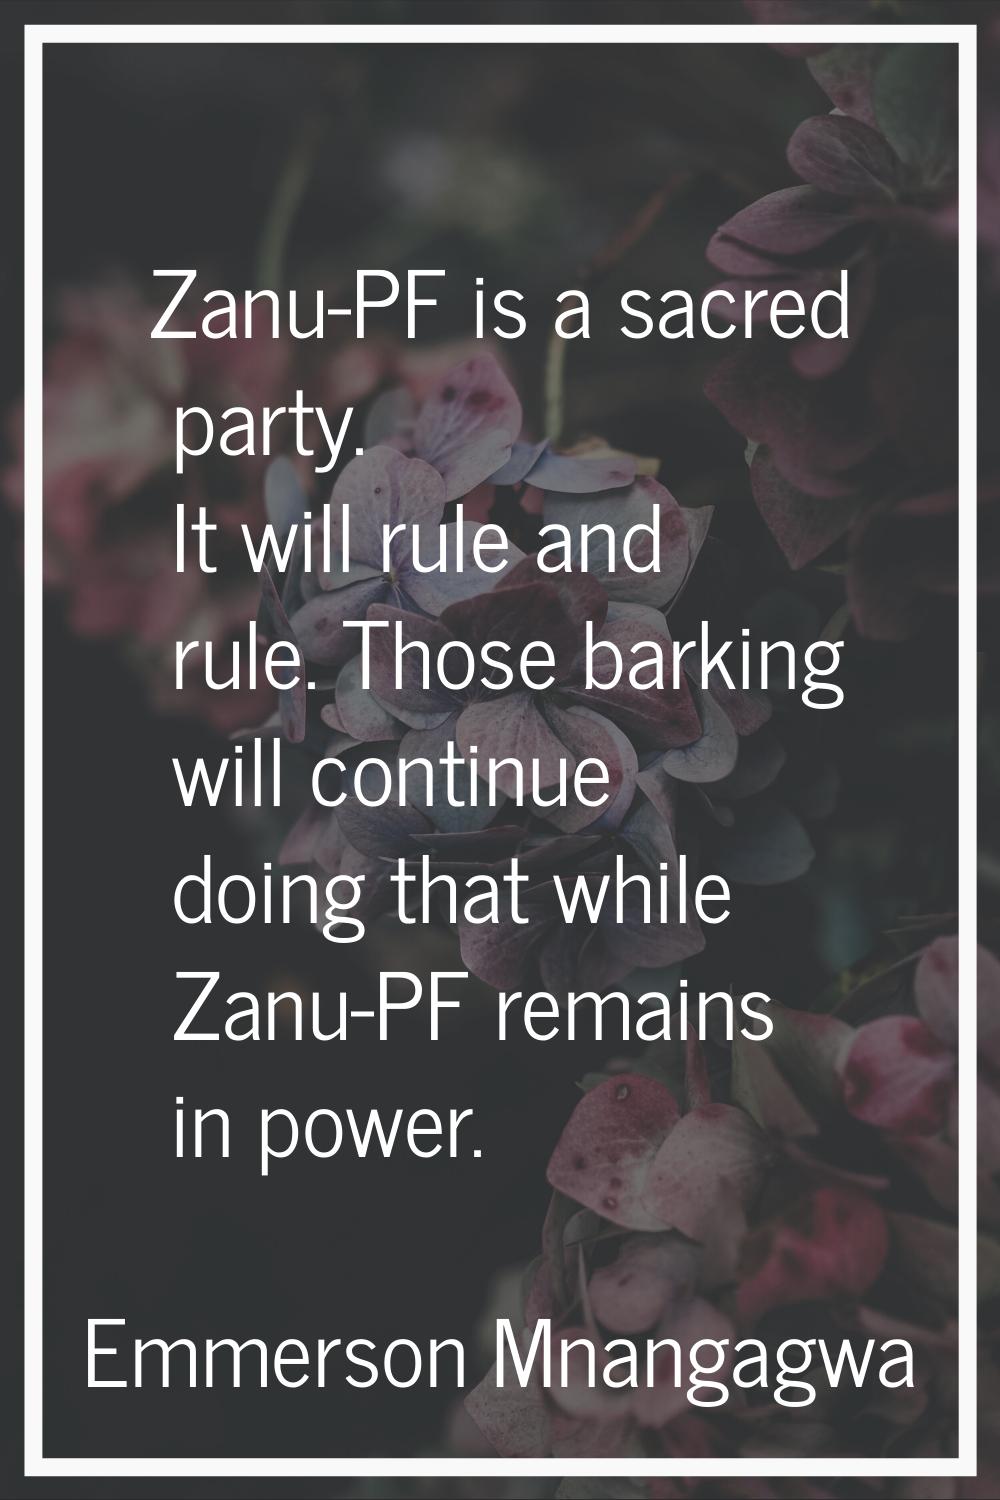 Zanu-PF is a sacred party. It will rule and rule. Those barking will continue doing that while Zanu